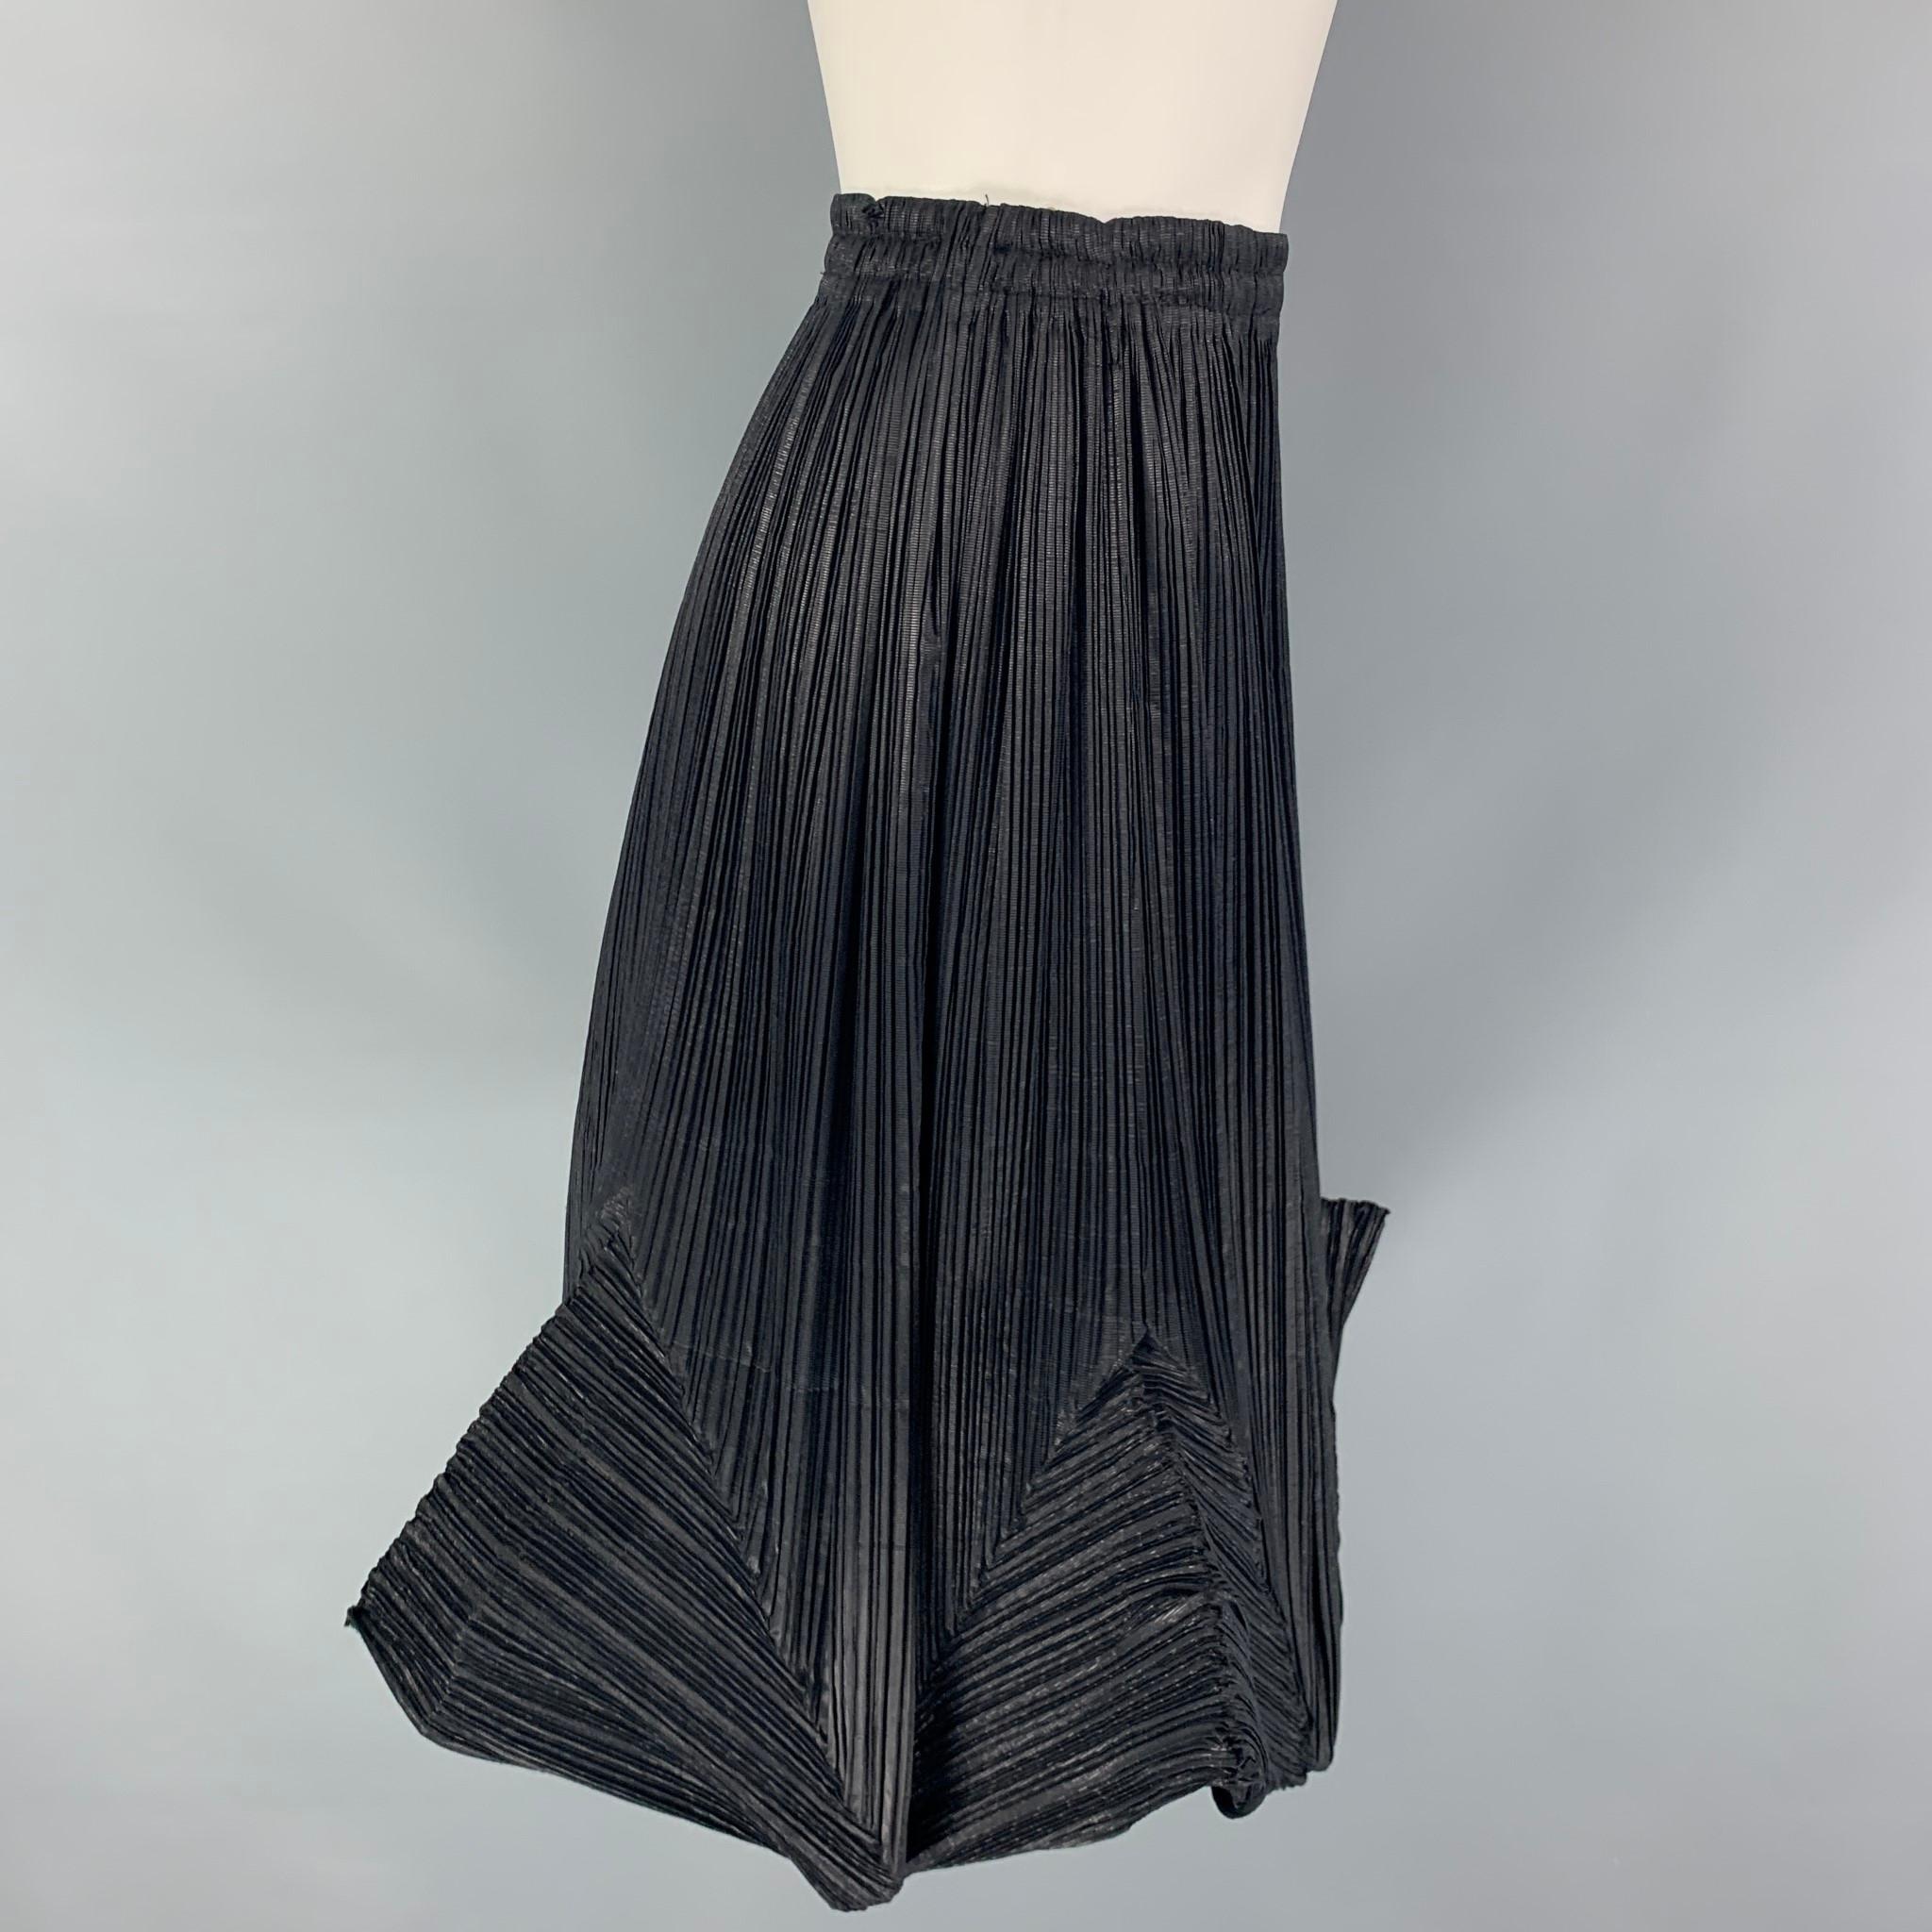 ISSEY MIYAKE skirt comes in a black polyester / silk featuring a 3D pleated design, midi, and a elastic waistband. Made in Japan. 

Very Good Pre-Owned Condition.
Marked: S

Measurements:

Waist: 26 in.
Hip: 36 in.
Length: 21 in.